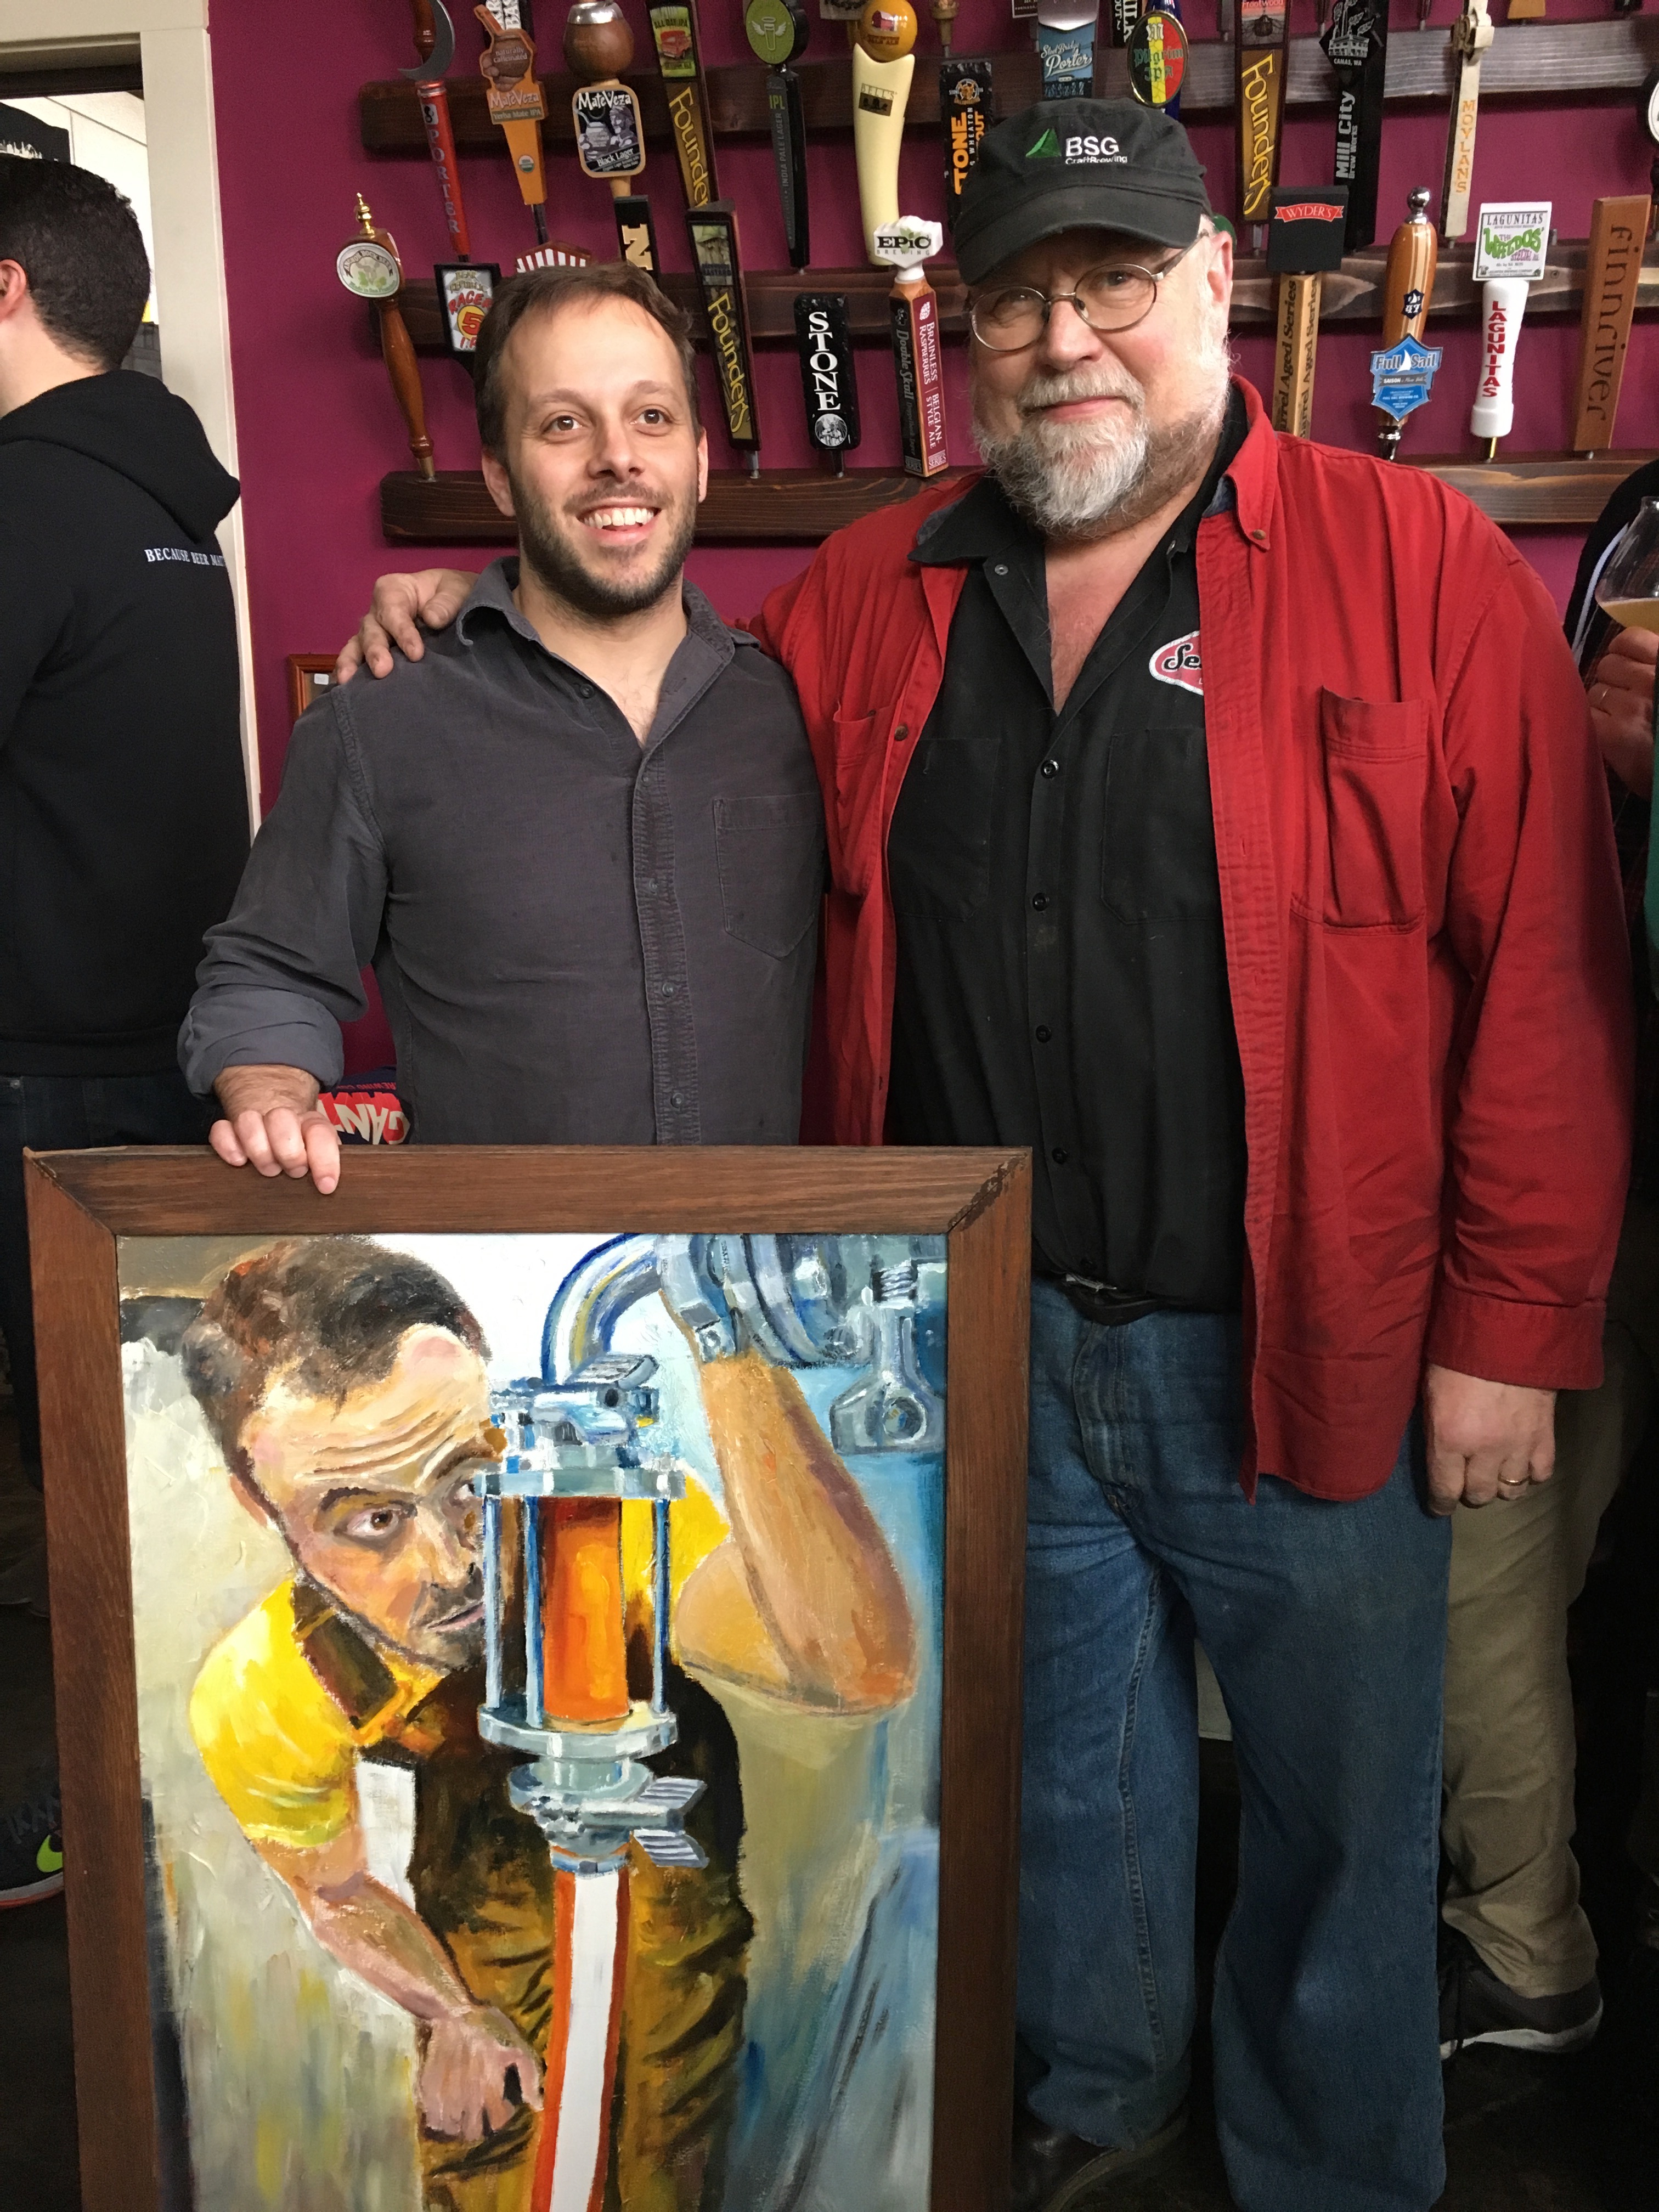 John Foyston presents Ben Edmunds with a portrait that John painted a few years back at Belmont Station's 20th Anniversary.